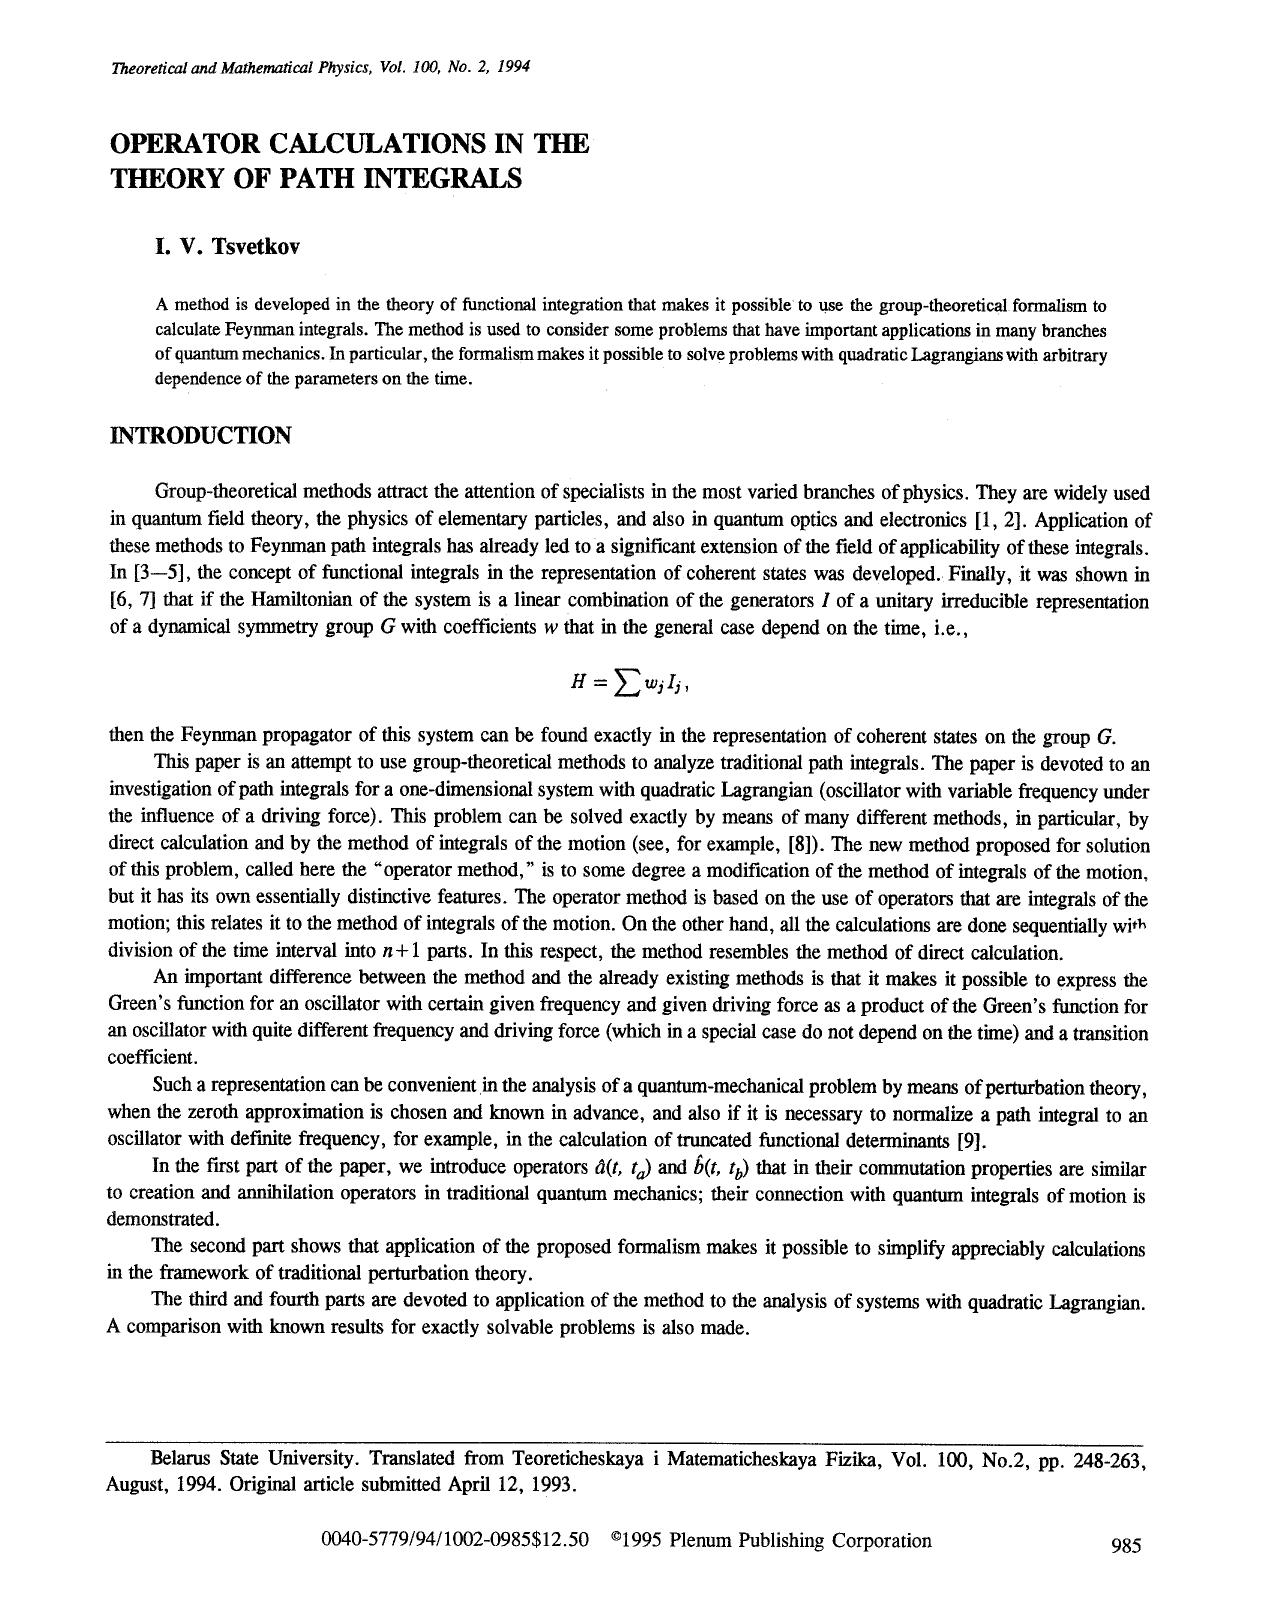 Operator calculations in the theory of path integrals by Unknown